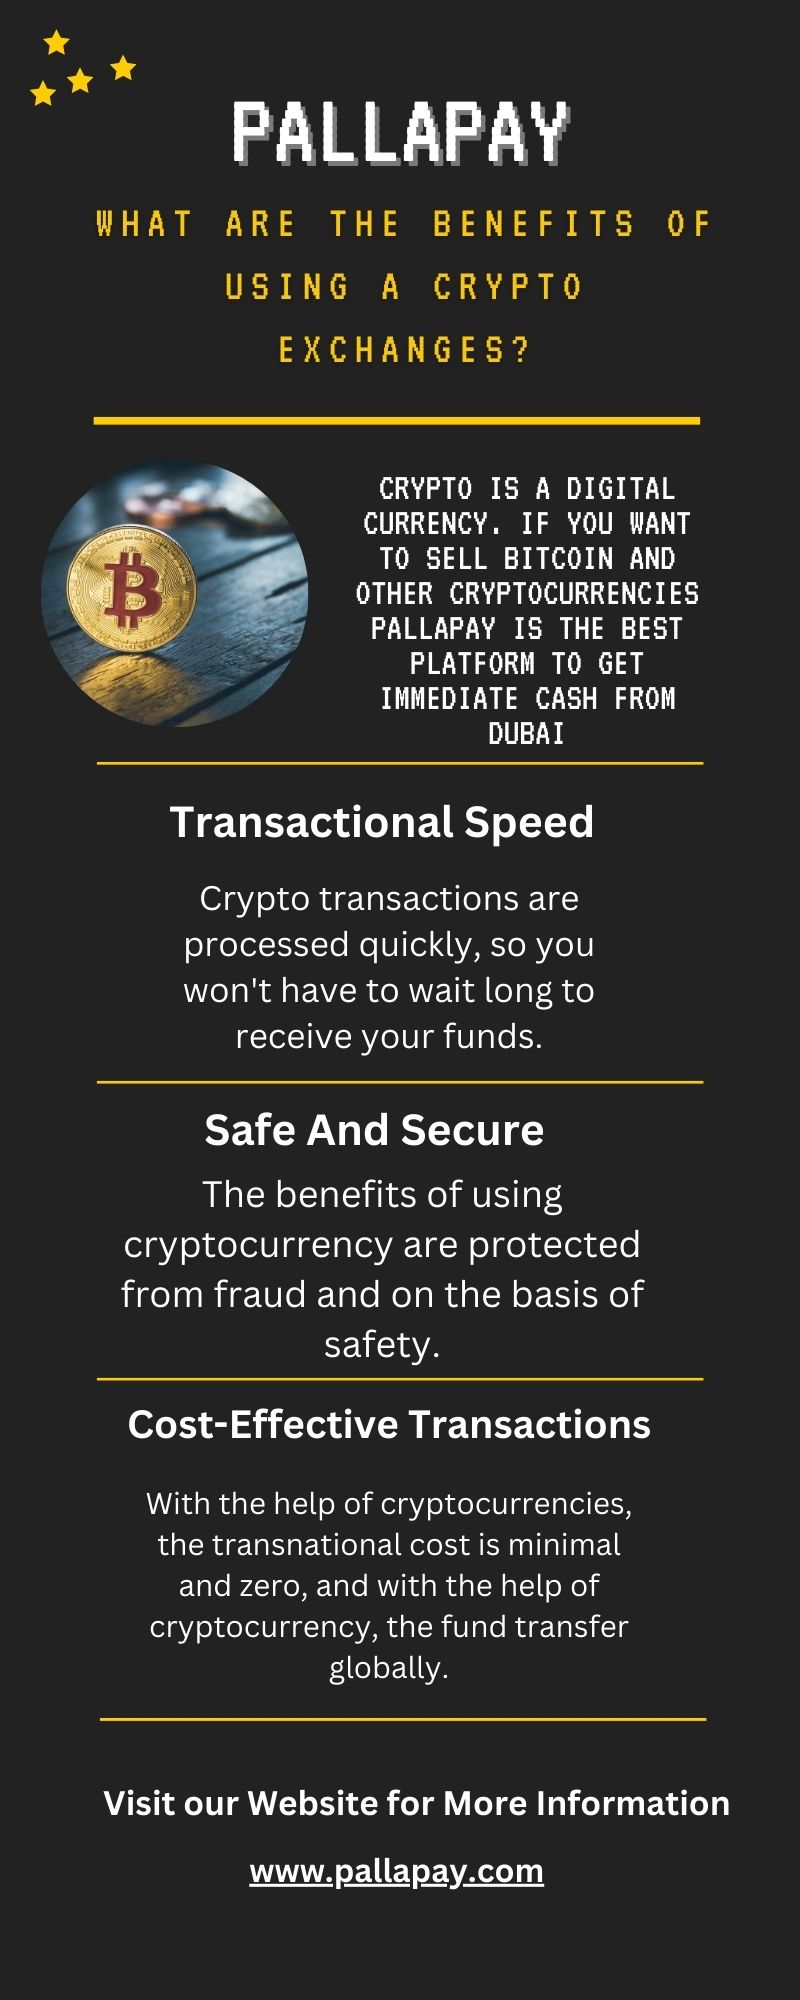 What are the benefits of using crypto exchanges?